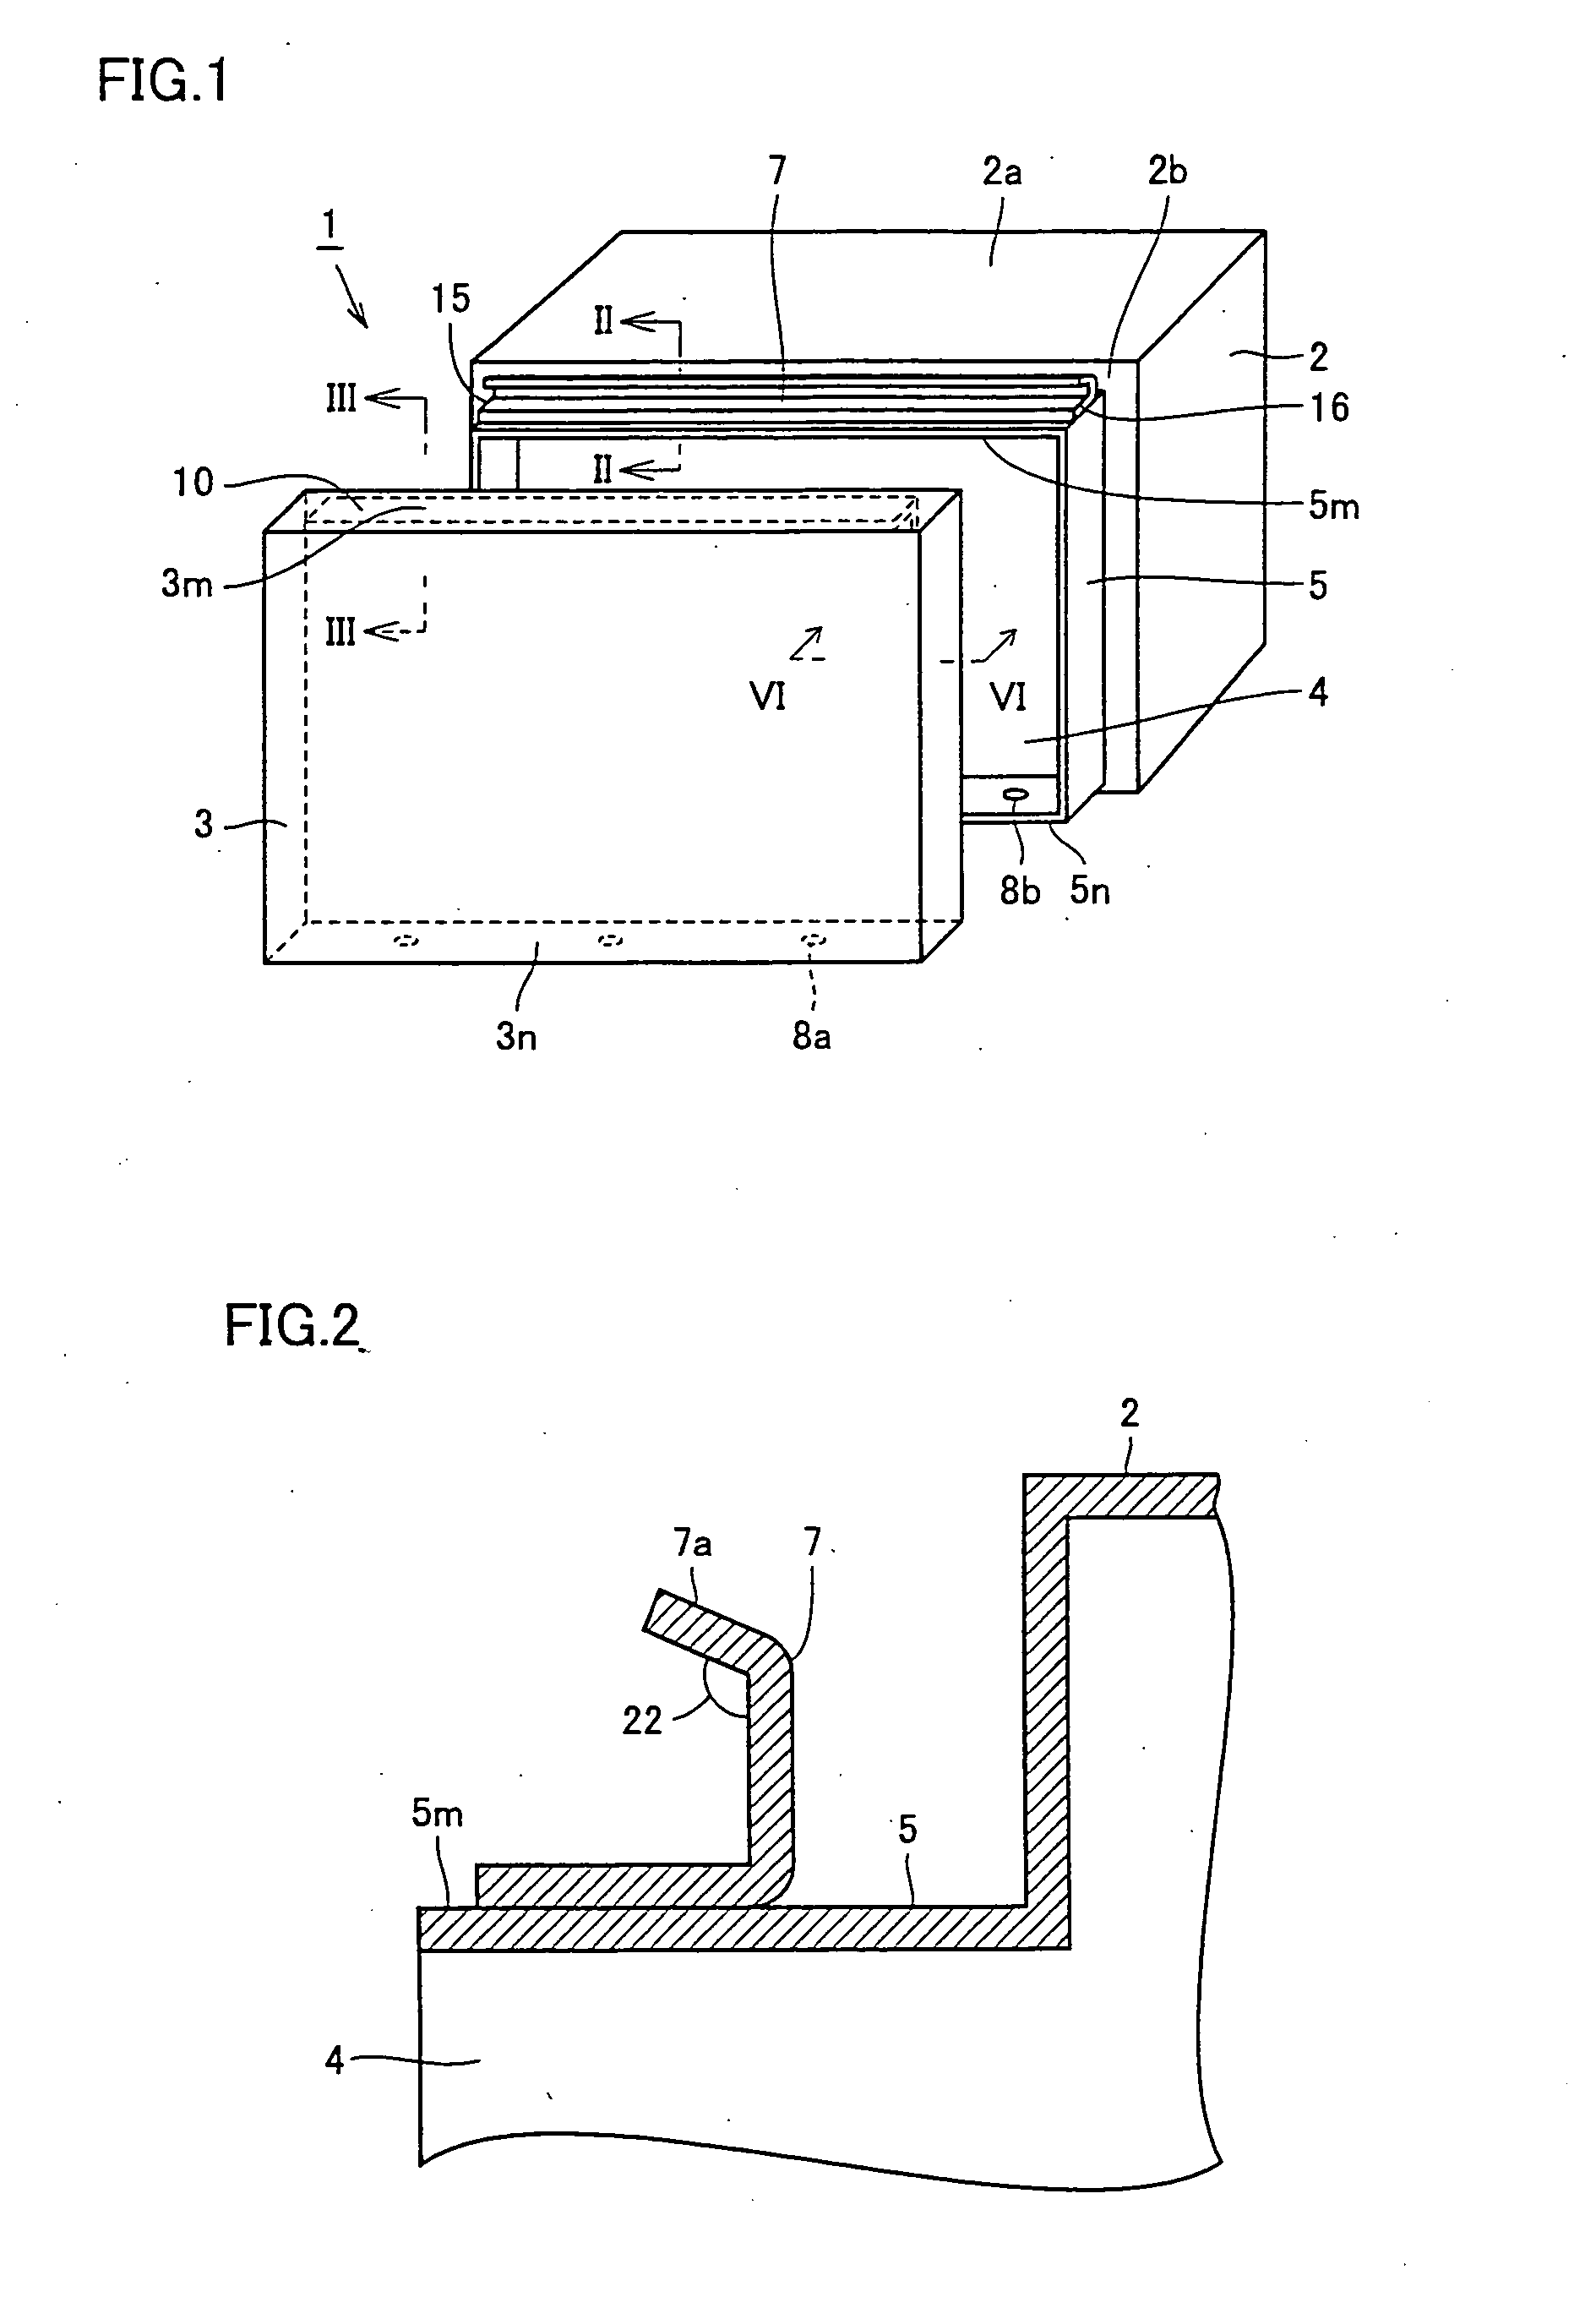 Outdoor-installed power conditioner device